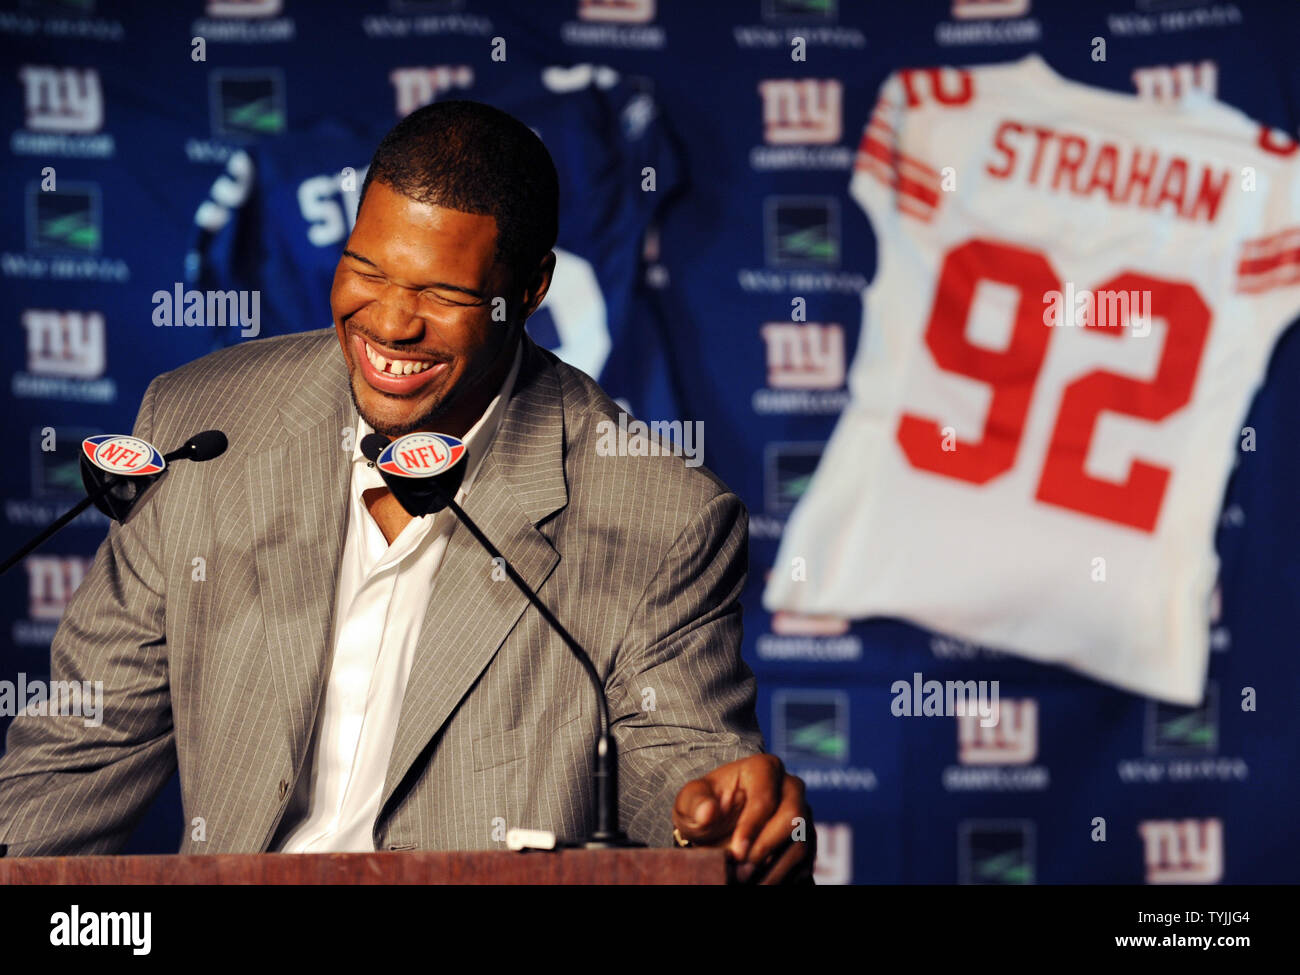 New York Giants Michael Strahan laughs at his retirement press conference at Giants Stadium in East Rutherford, New Jersey on June 6, 2008. Strahan retires after 15 years playing for the New York Giants in the NFL.      (UPI Photo/John Angelillo)      . Stock Photo